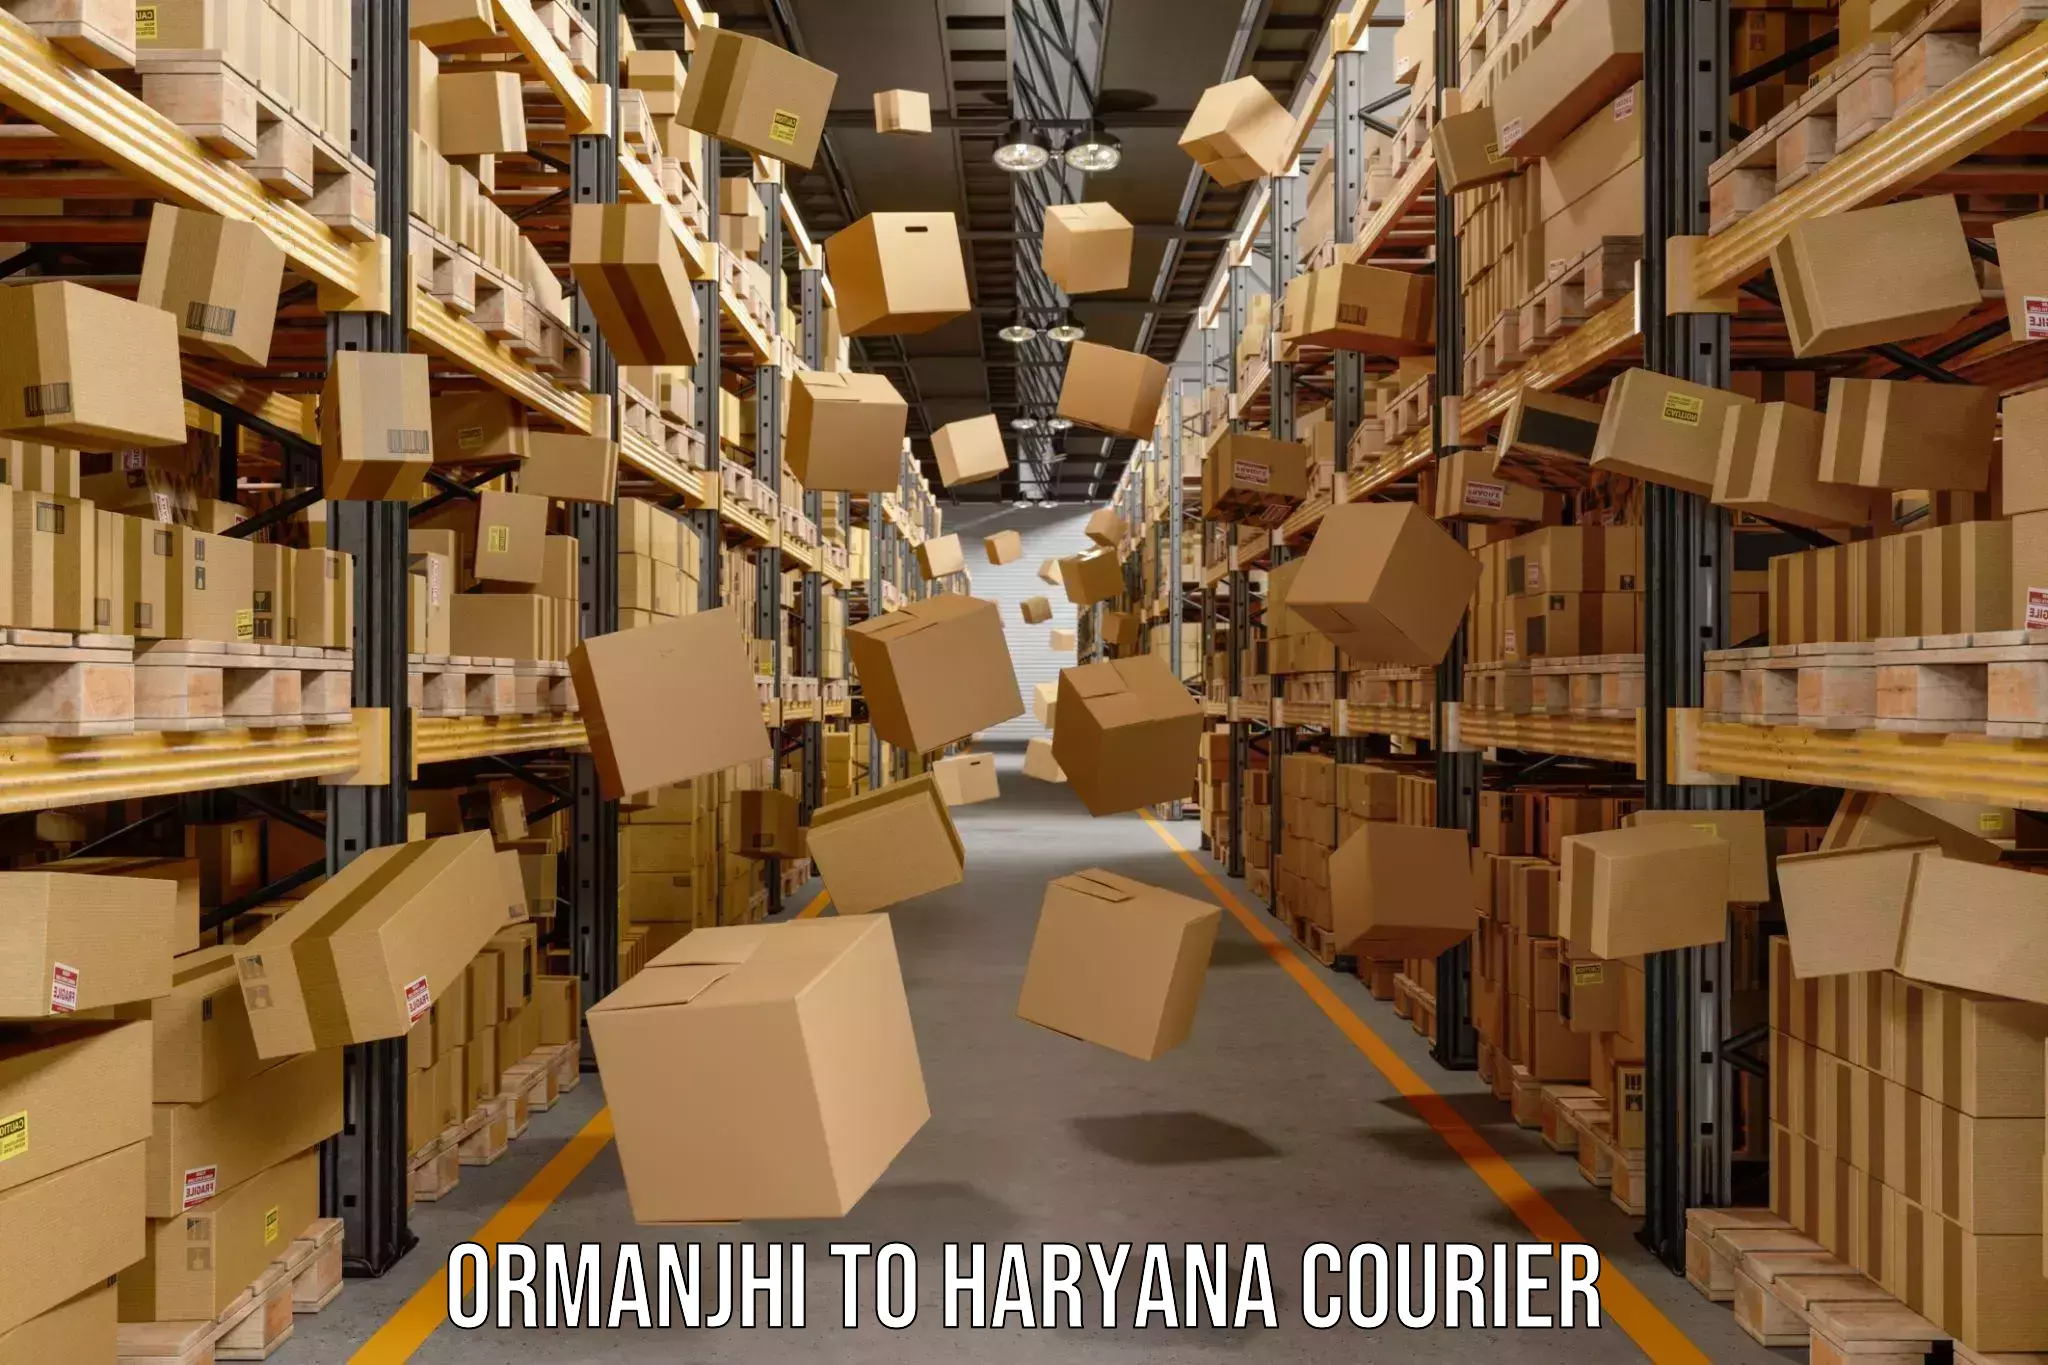 User-friendly courier app Ormanjhi to NCR Haryana